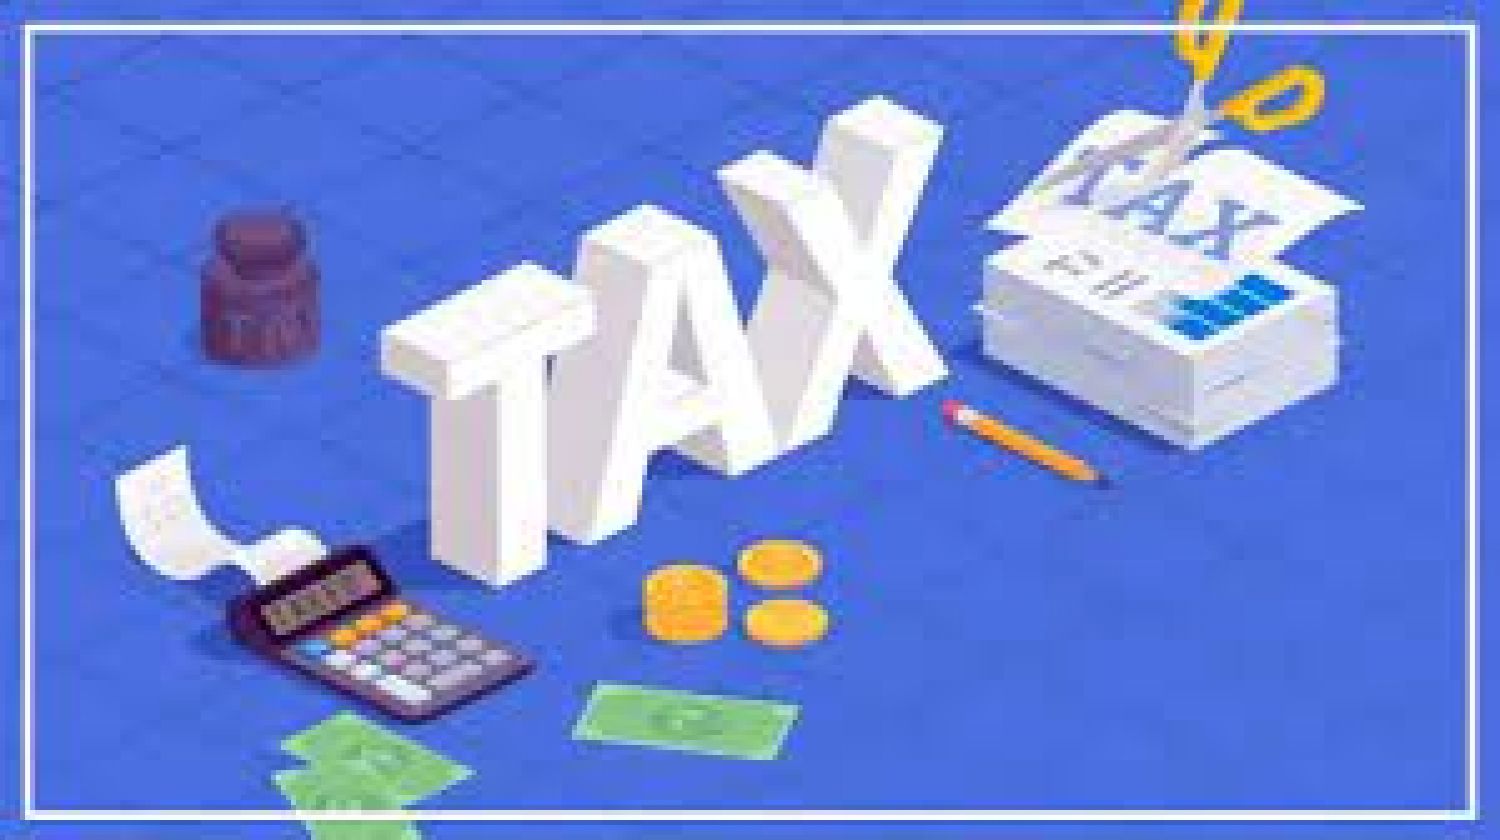 CBDT issued additional Guidelines for removal of difficulties u/s 194R of the IT Act